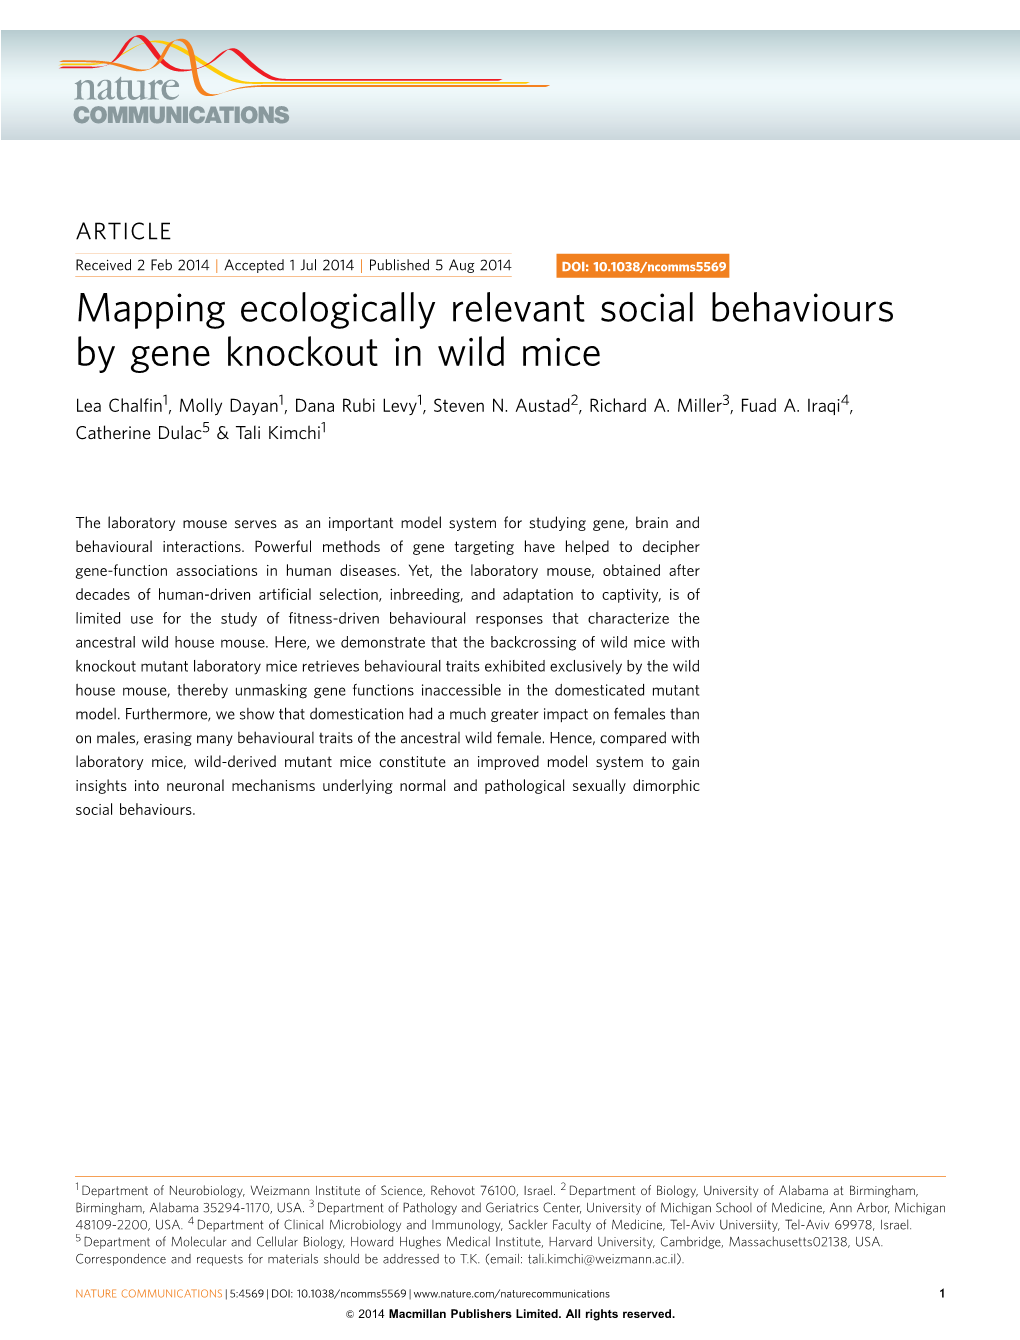 Mapping Ecologically Relevant Social Behaviours by Gene Knockout in Wild Mice